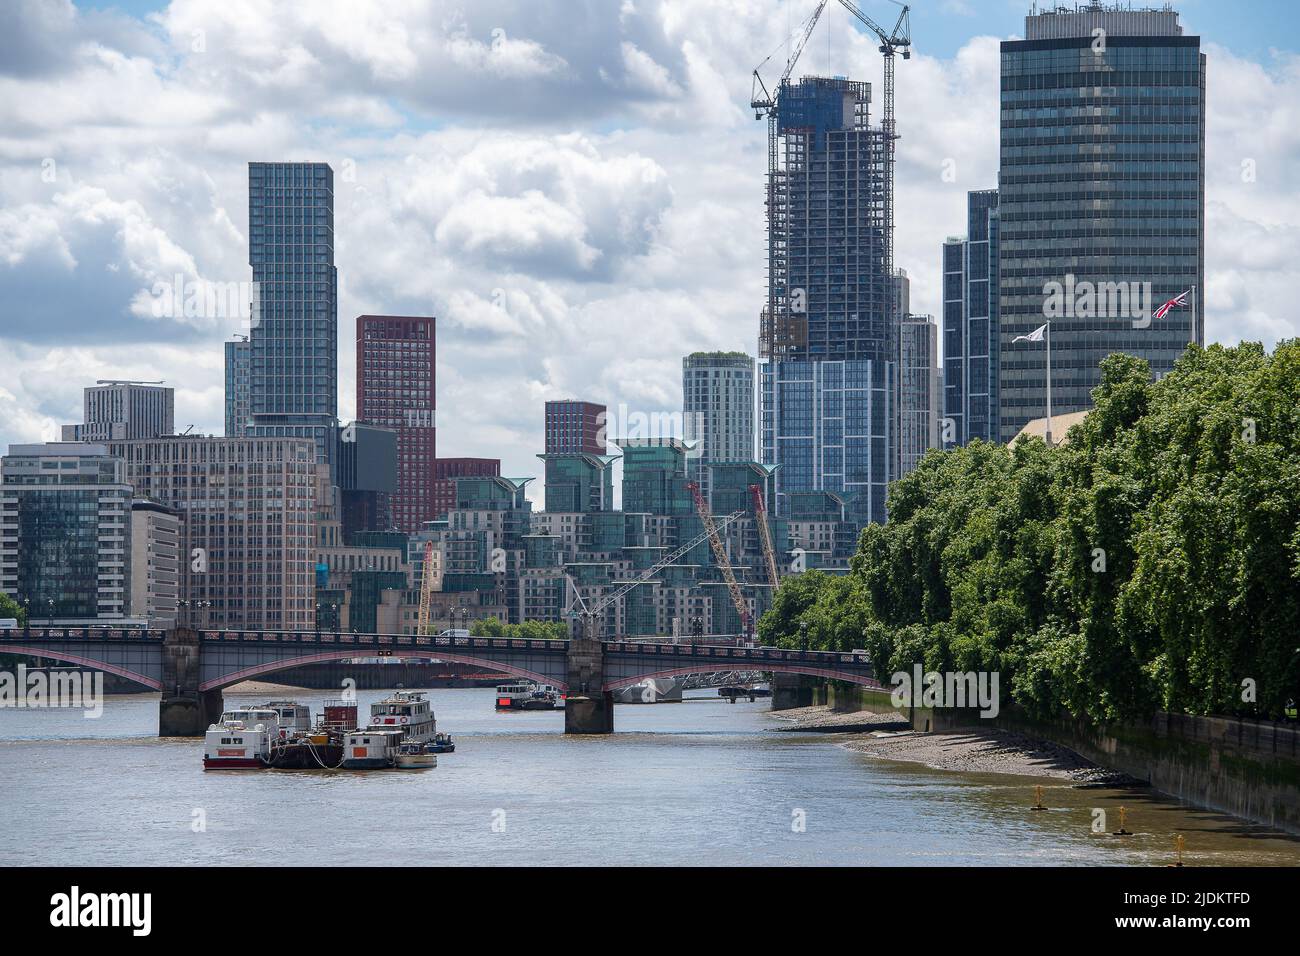 Westminster, London, UK. 8th June, 2022. The ever changing skyline at Vauxhall as thousands of new residental sky scraper apartments are built. Credit: Maureen McLean/Alamy Stock Photo